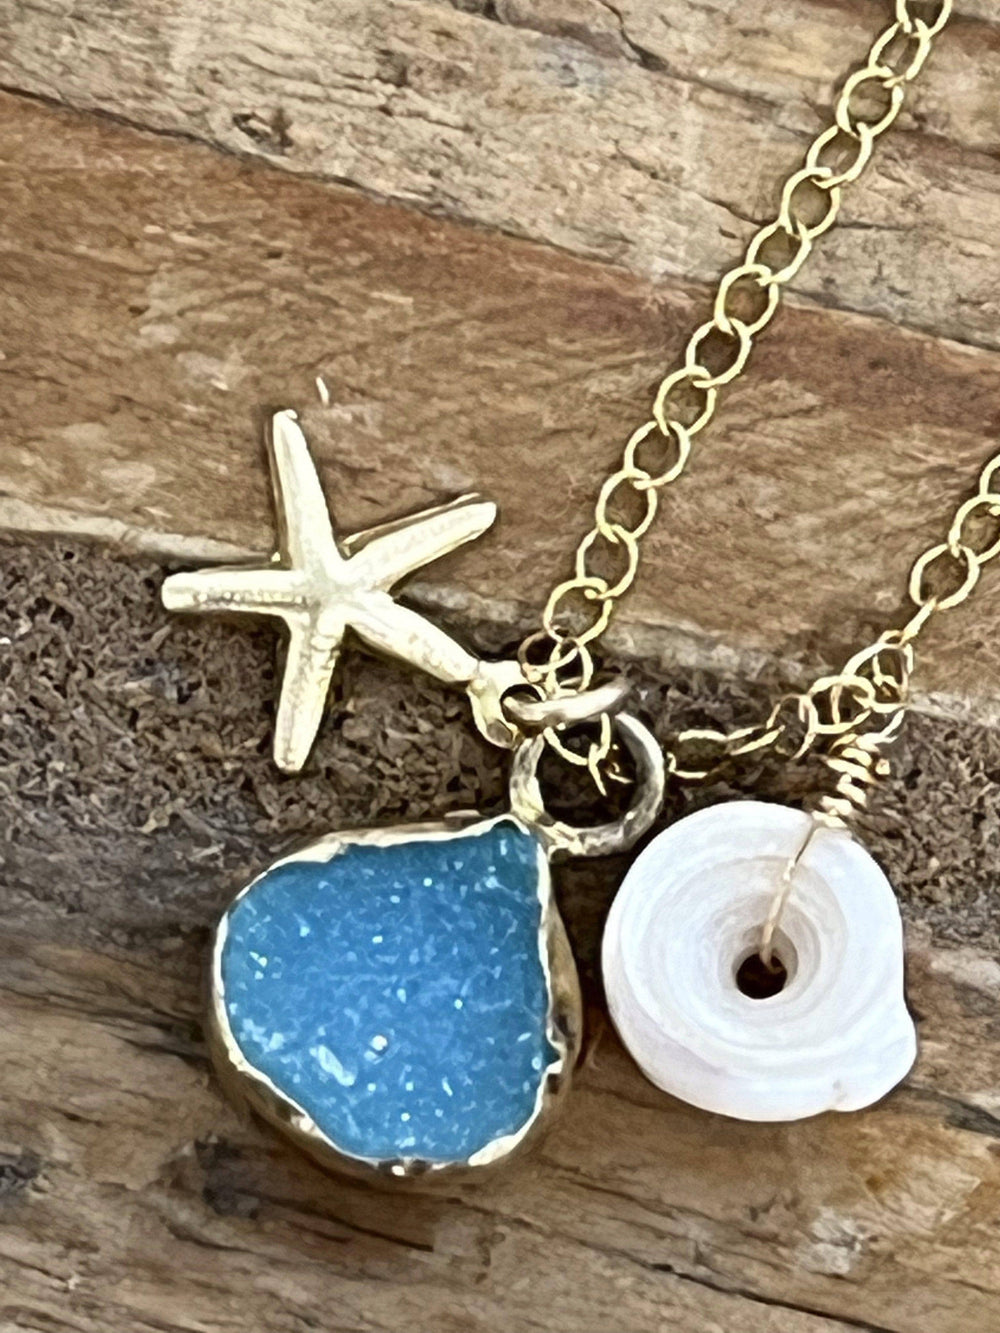 Cinnamon Girl Hawaii Jewelry Ocean Trio Necklace 14kt gold filled